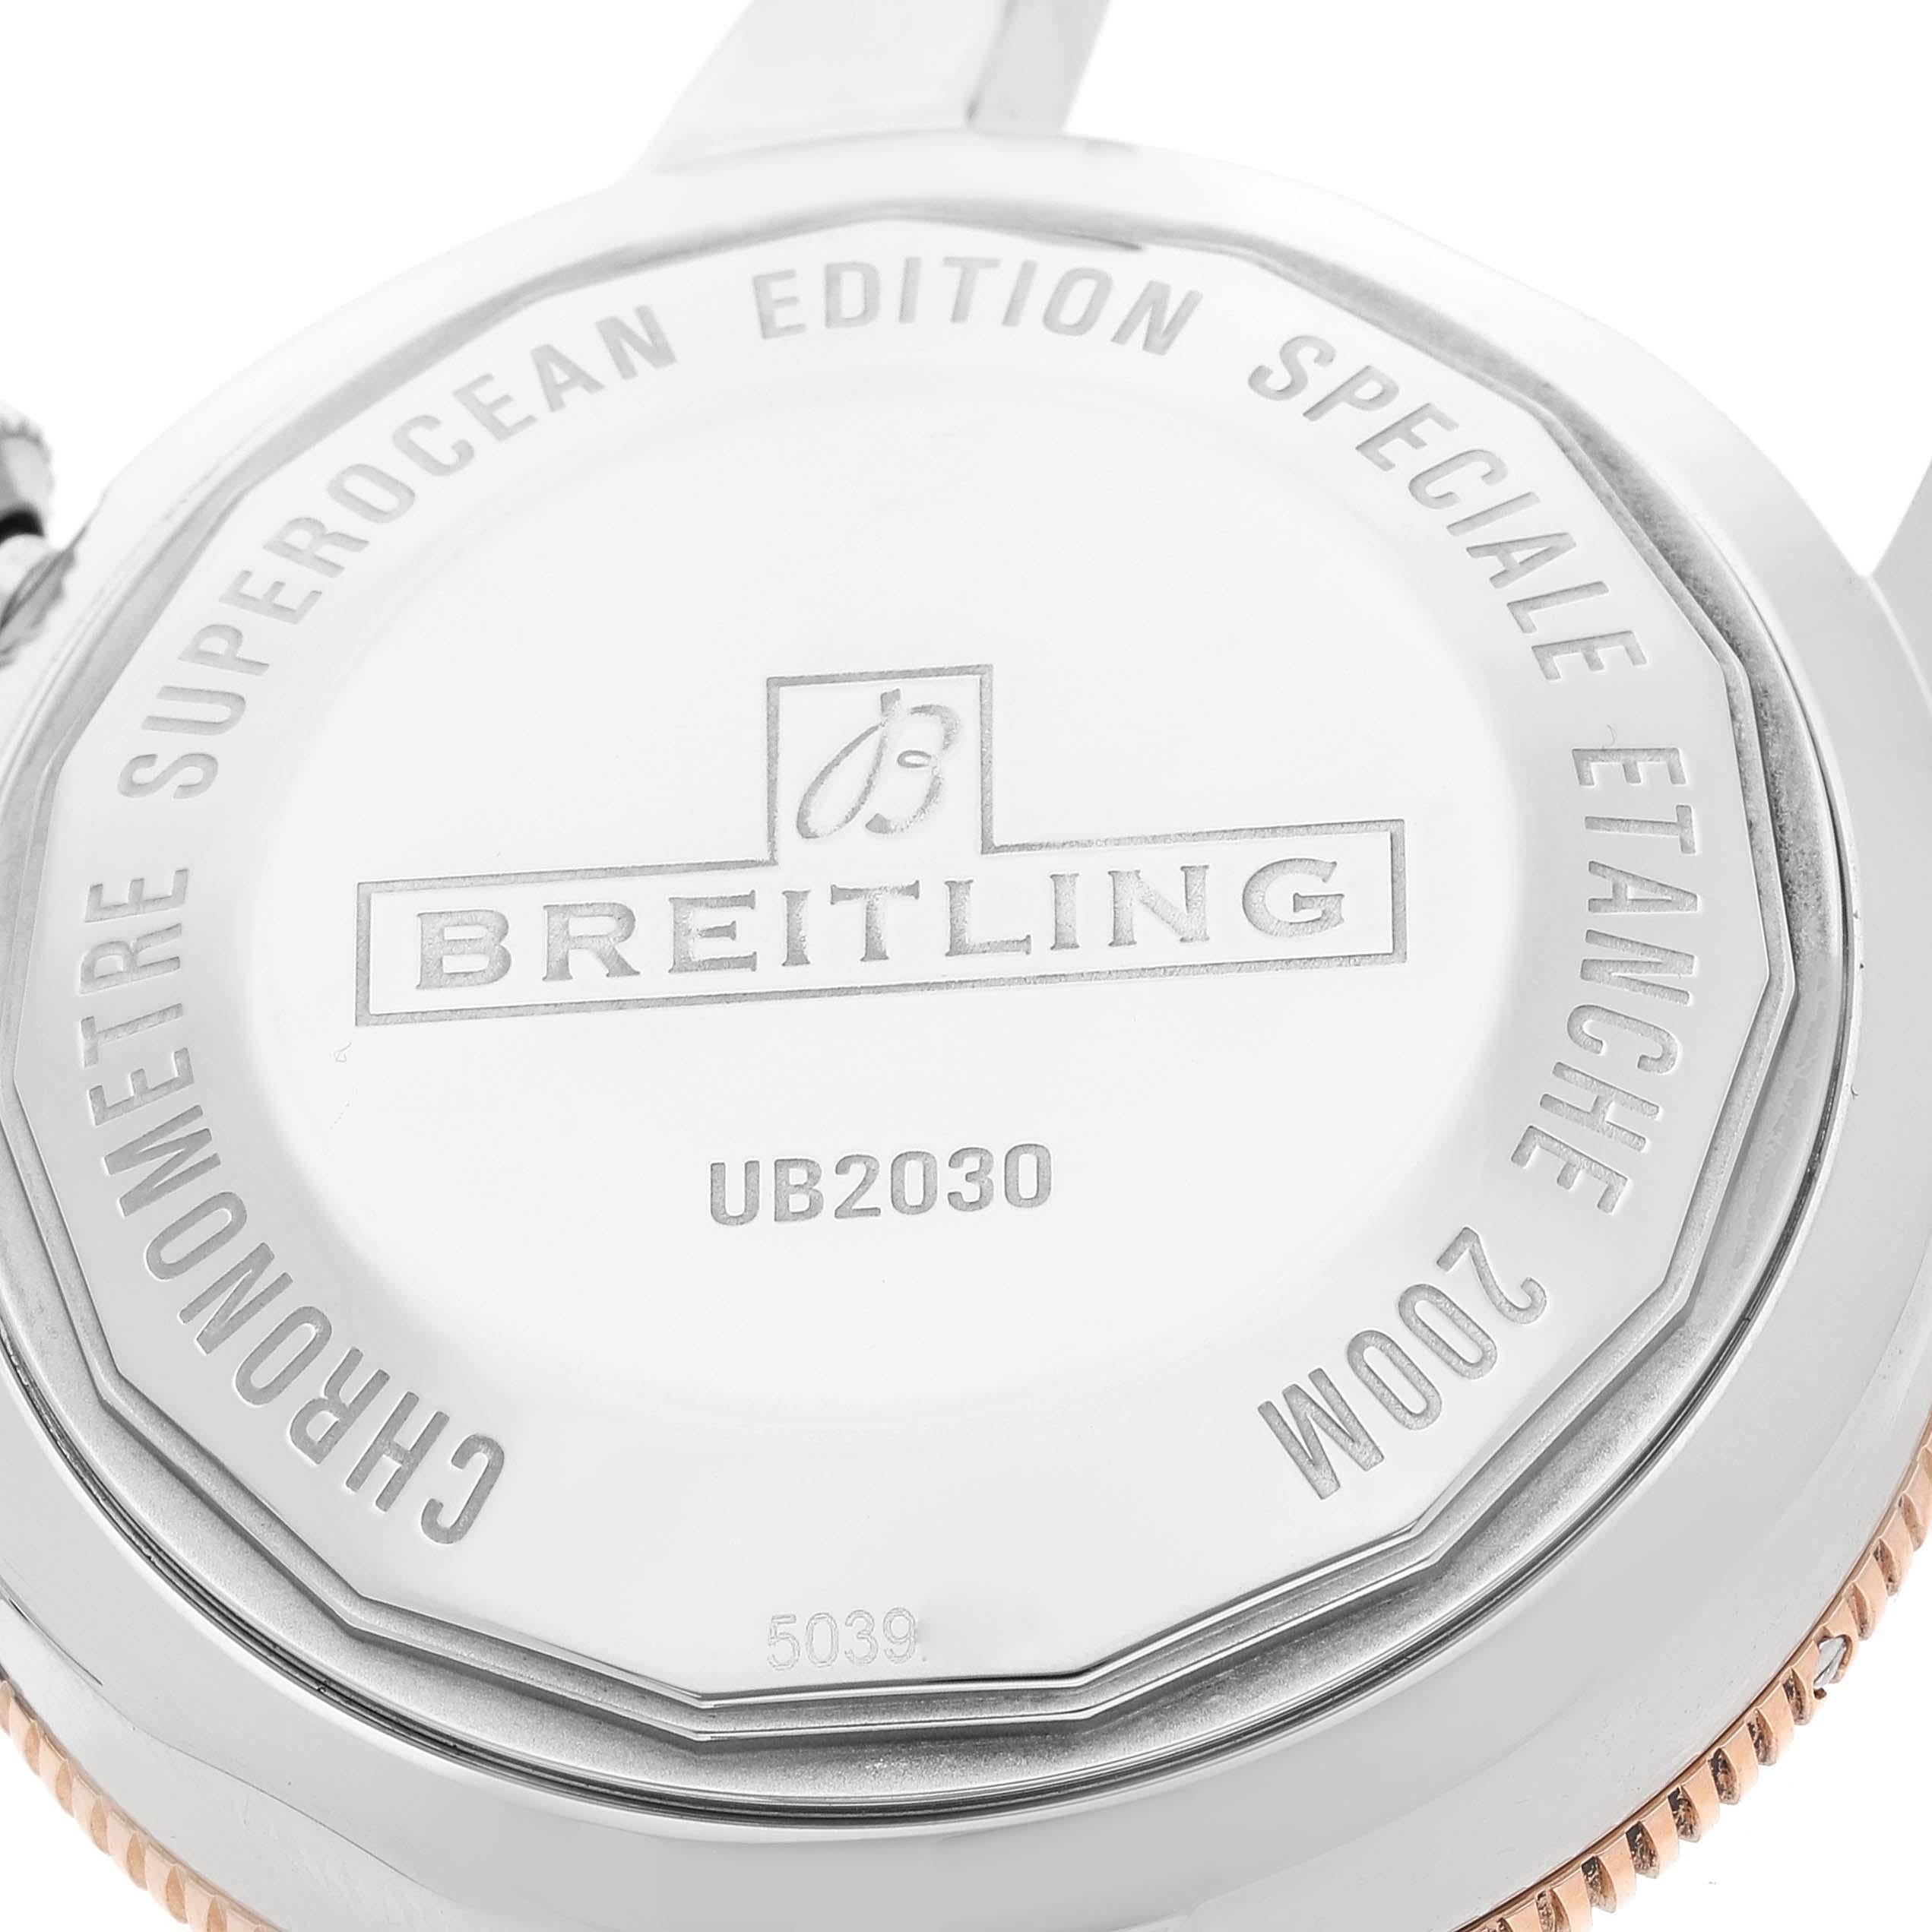 Breitling Superocean Heritage B20 Steel Rose Gold Mens Watch UB2030 Box Card For Sale 2